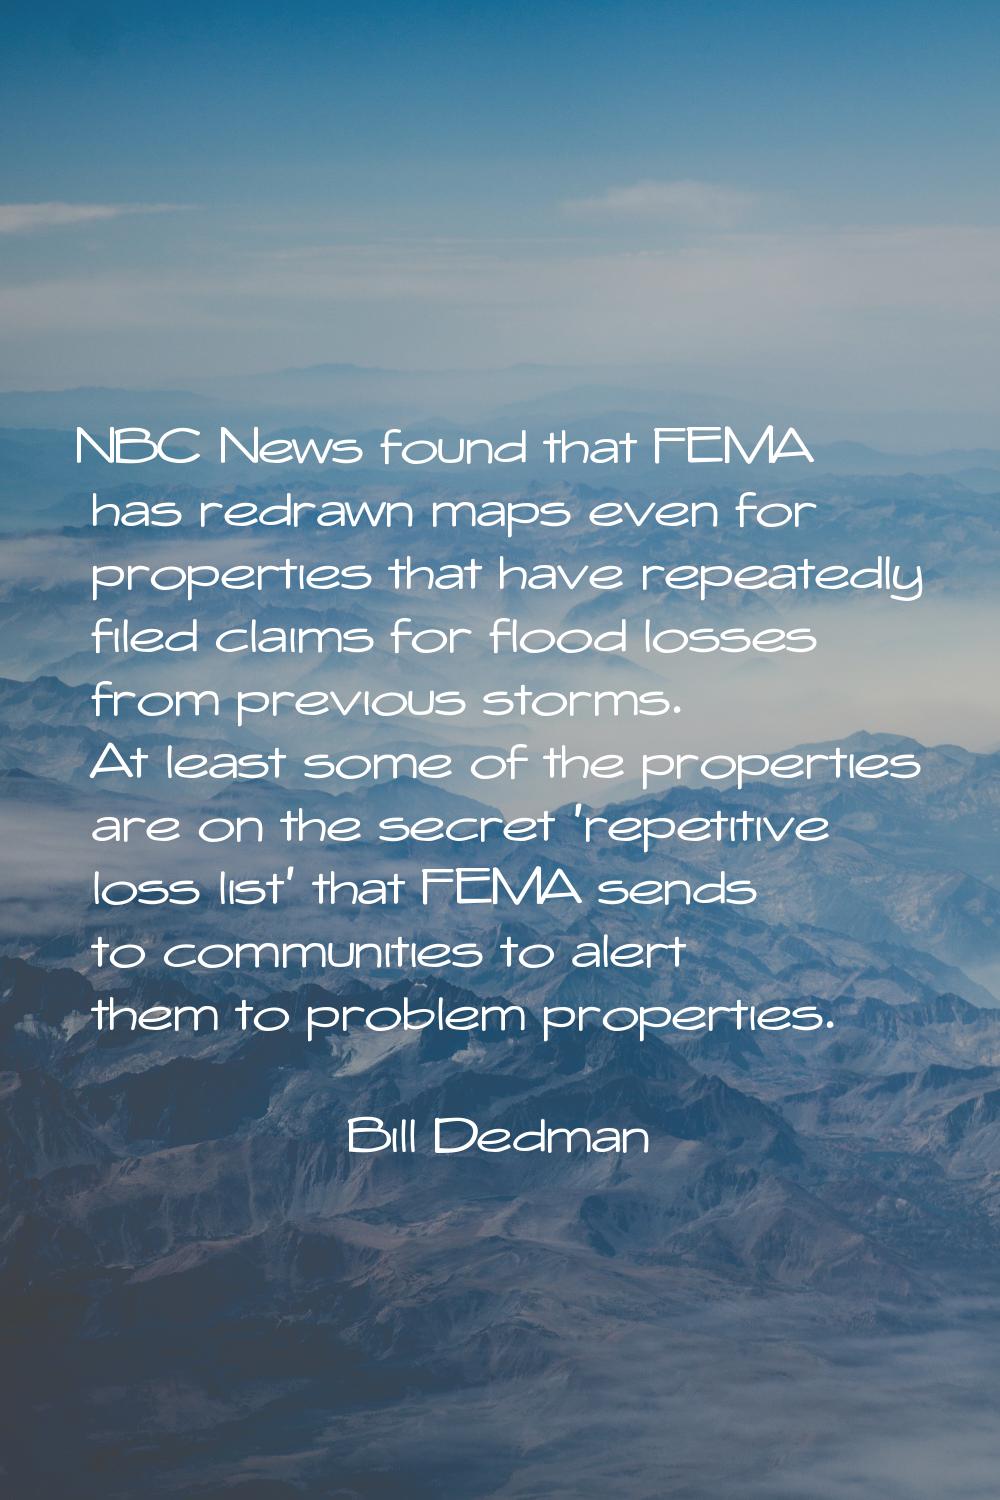 NBC News found that FEMA has redrawn maps even for properties that have repeatedly filed claims for